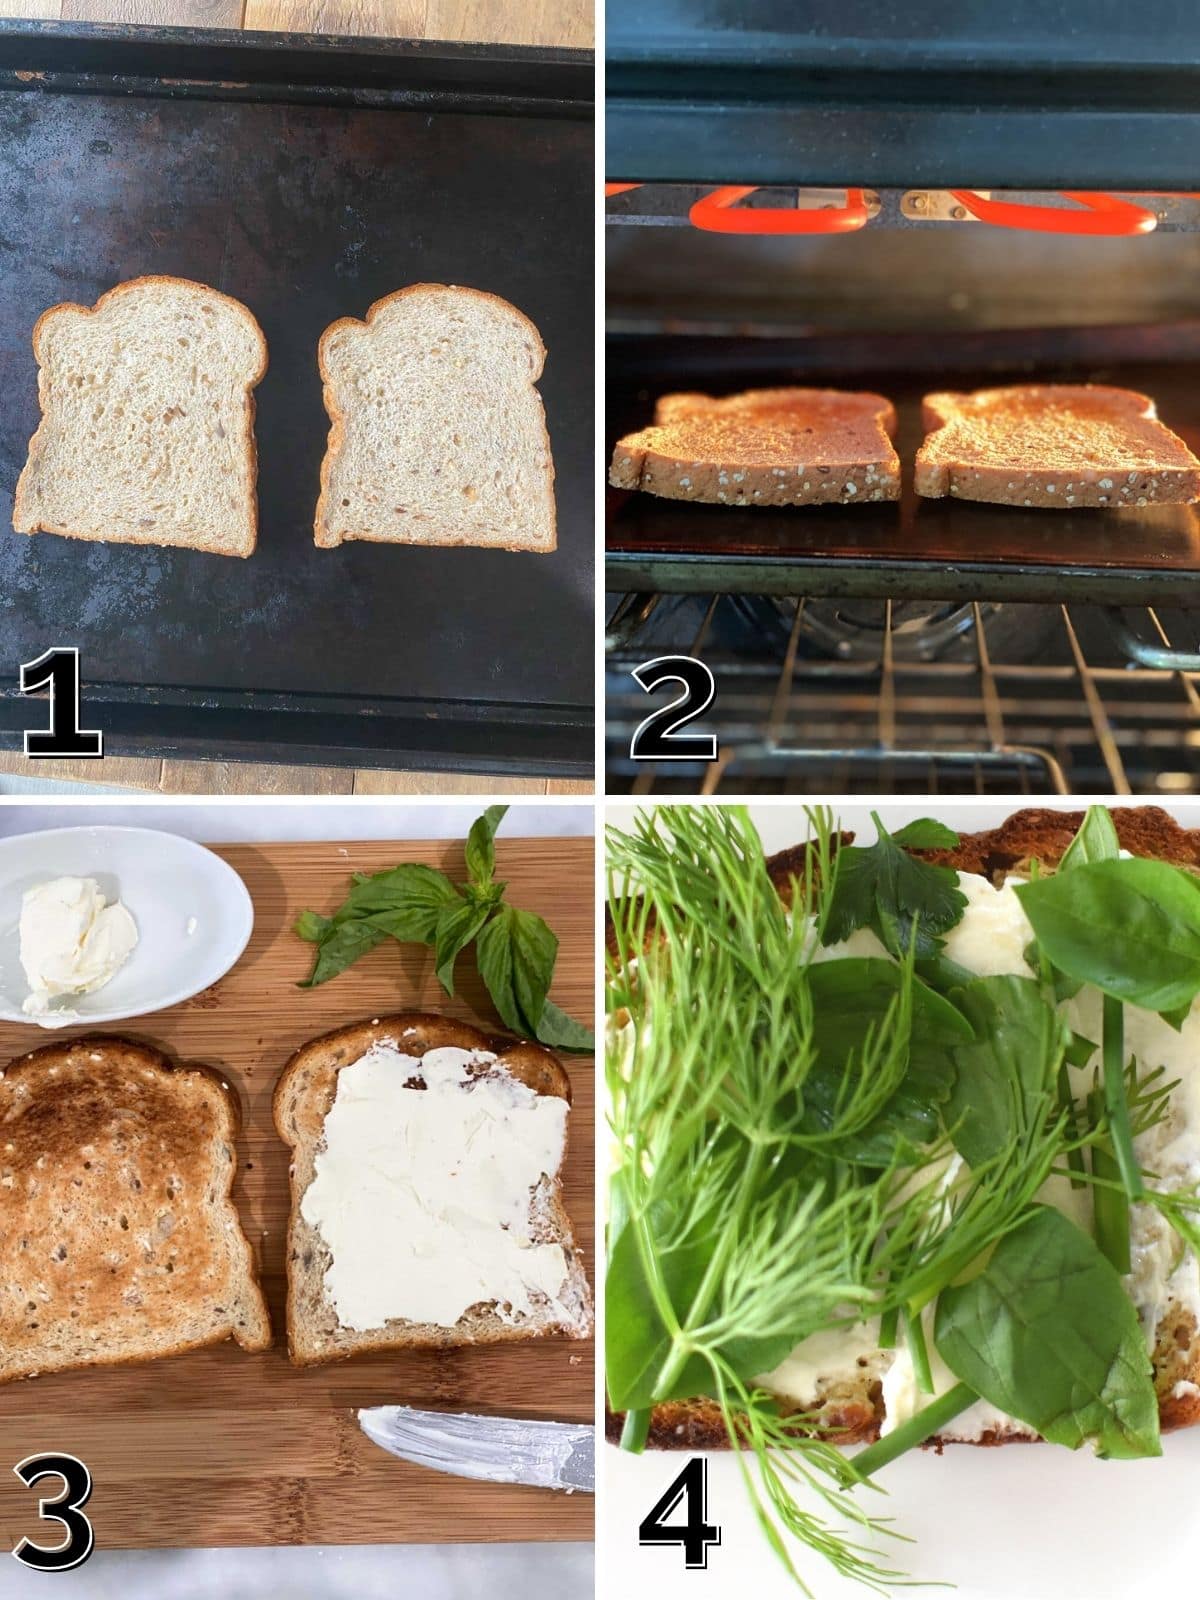 A step by step process shot with bread being toasted under a broiler and then topped with cream cheese.